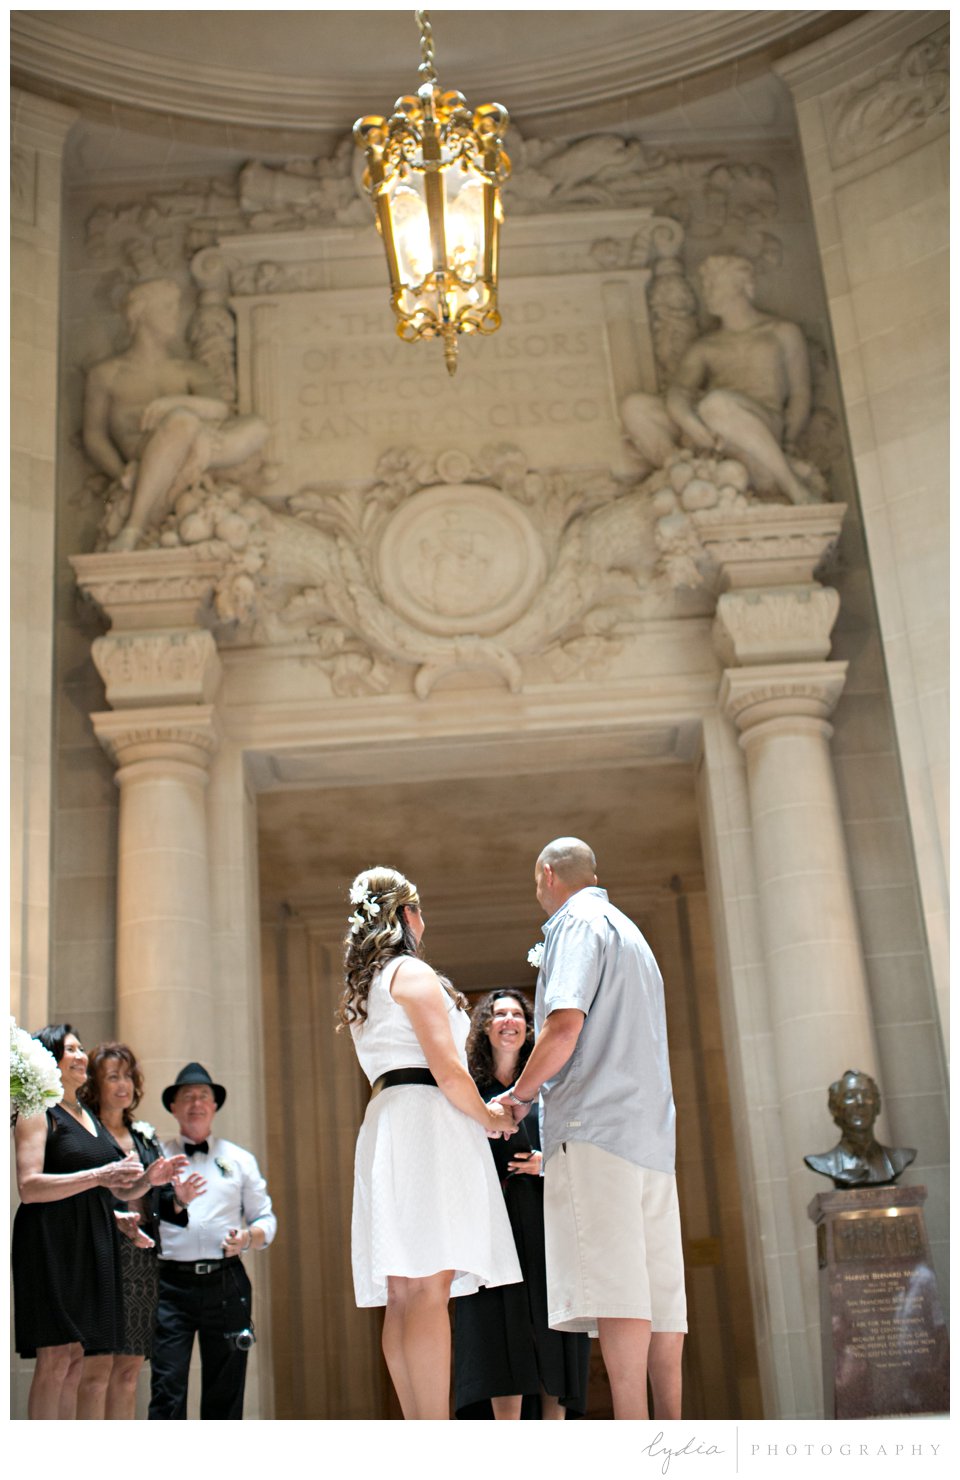 Bride and groom in the rotunda at black and white City Hall wedding in San Francisco, California